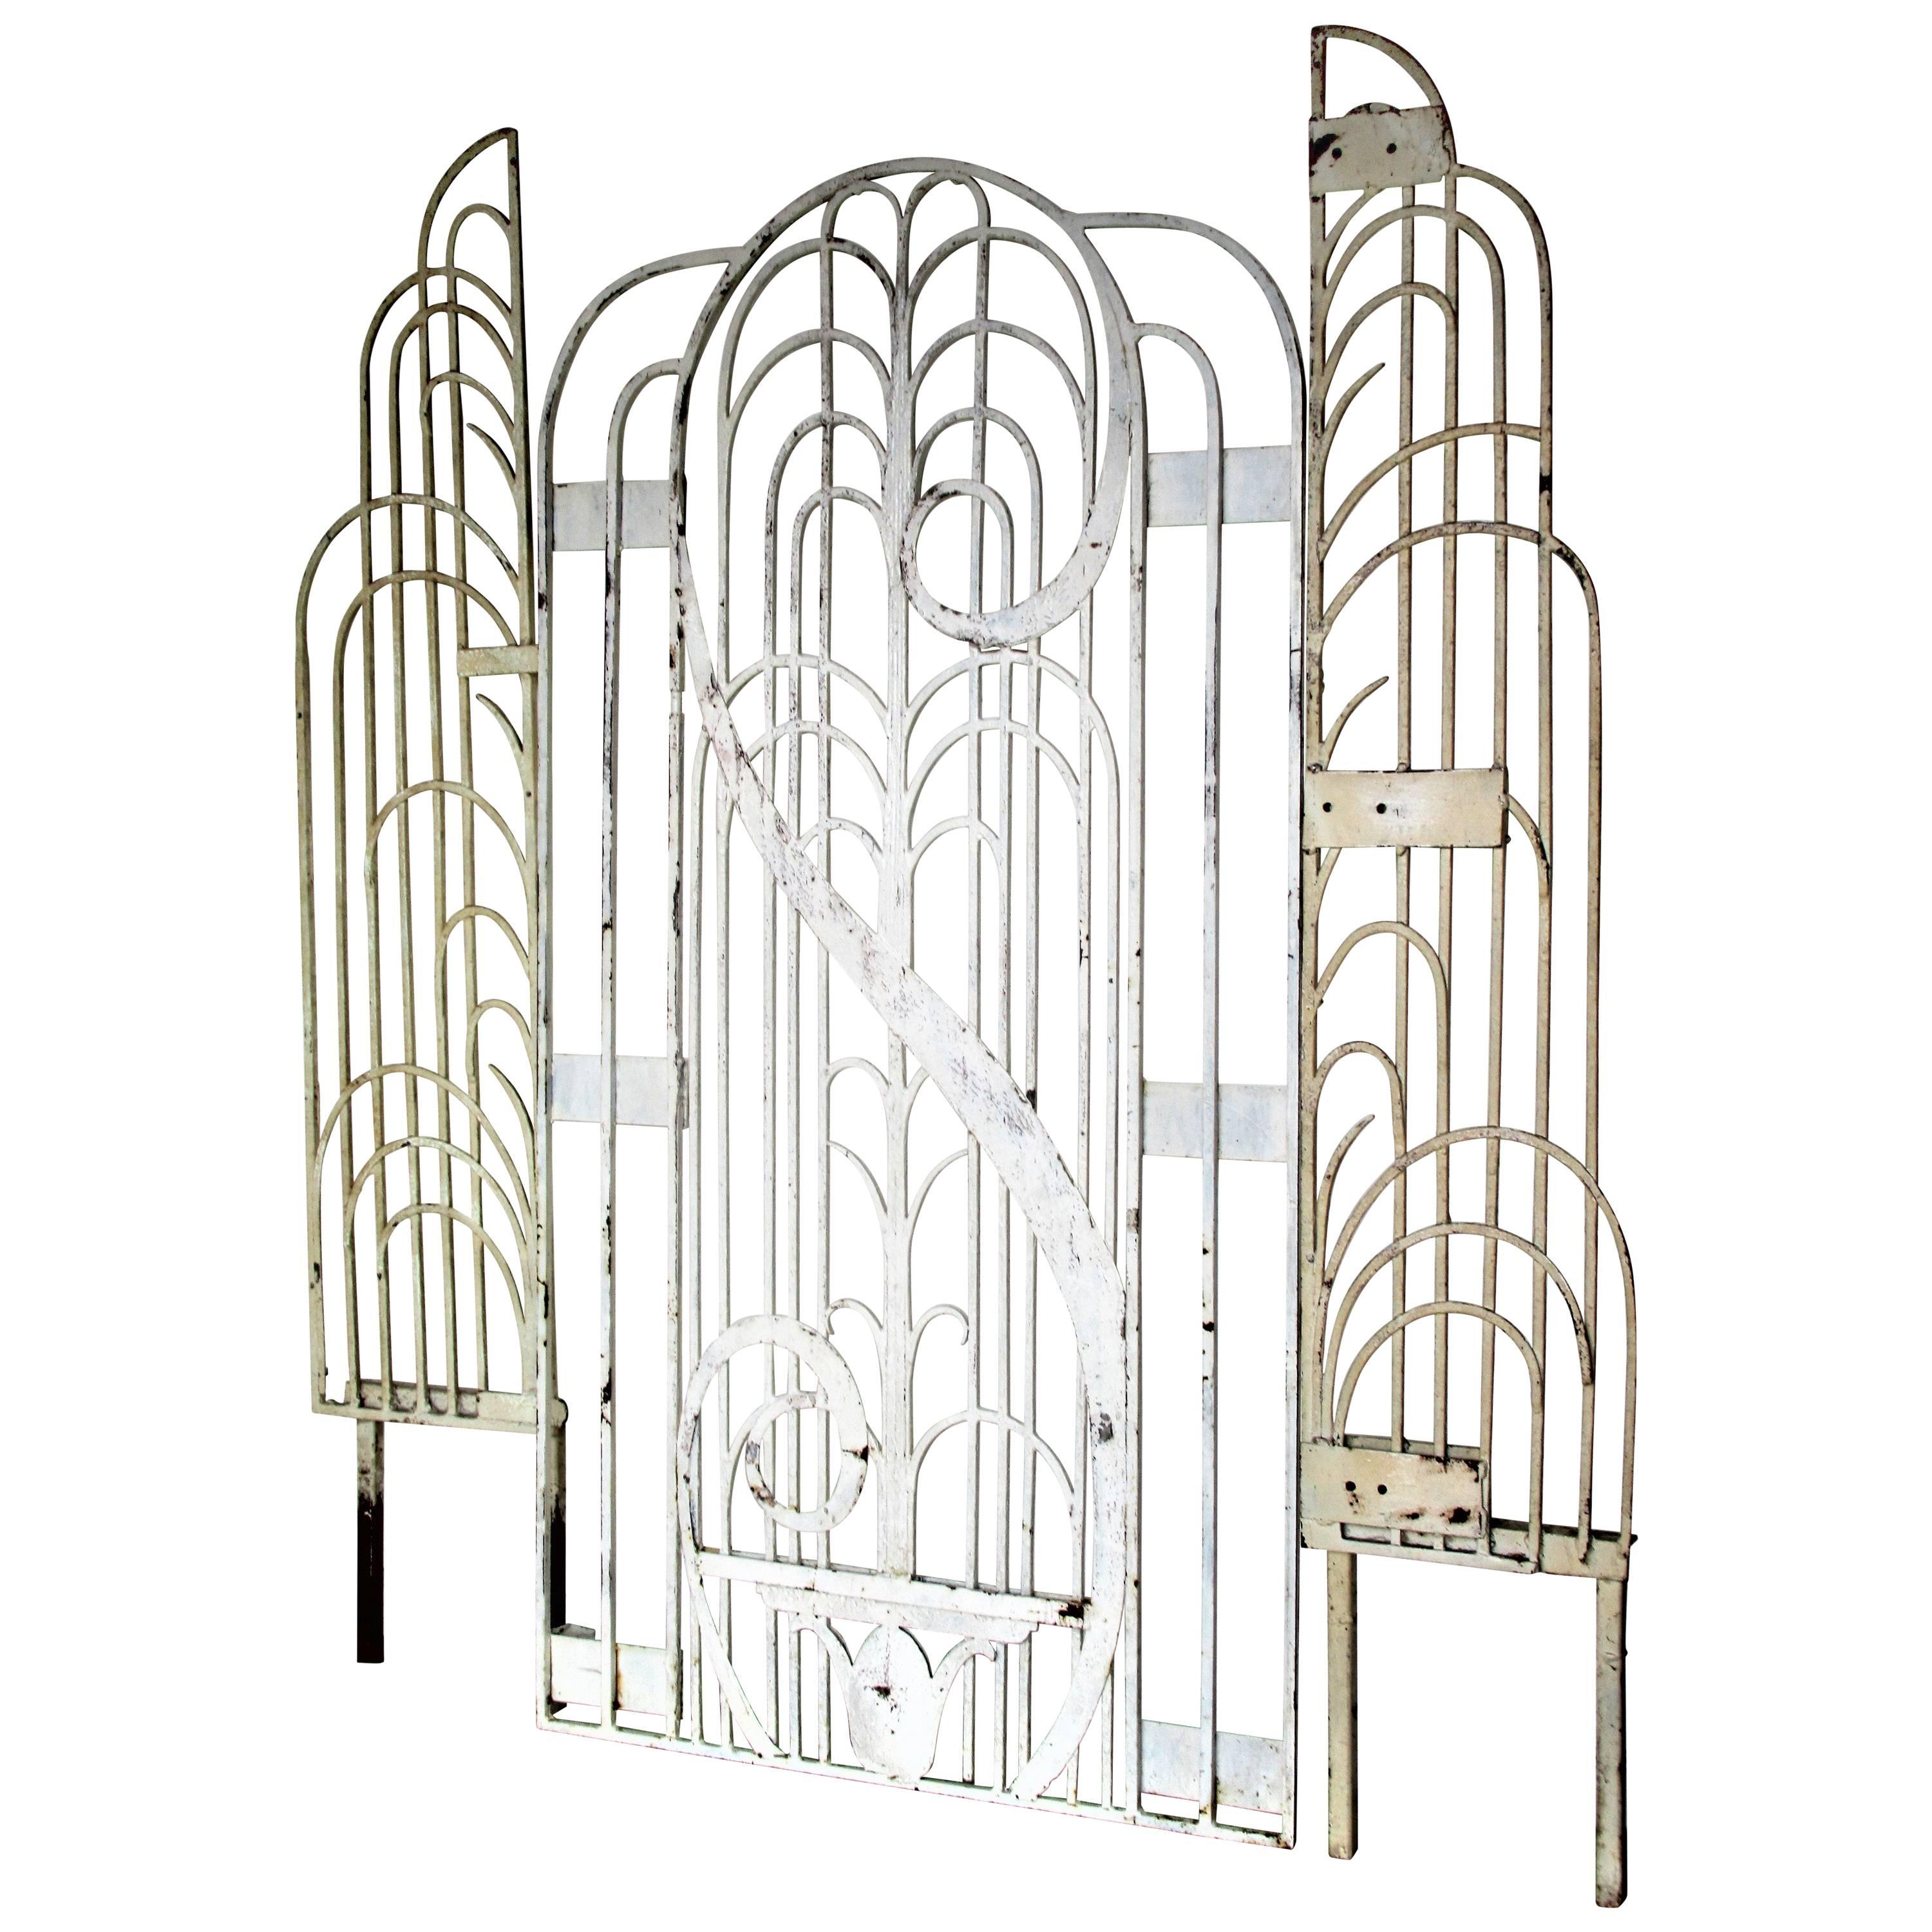 American Art Deco Architectural Hand Wrought Iron Gates